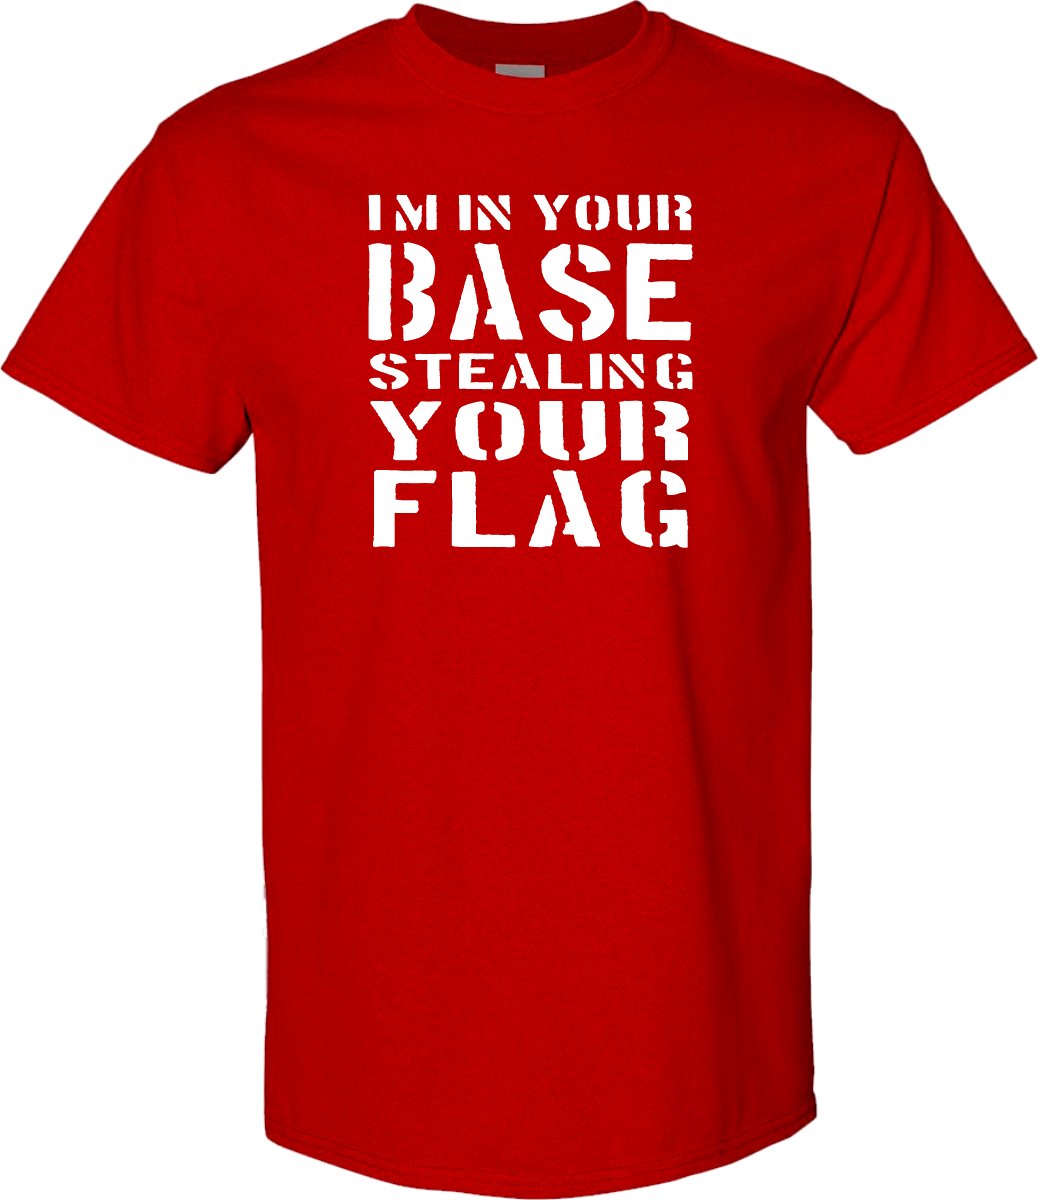 I'm in Your Base, Stealing Your Flag Paintball T shirt - SBS T Shop